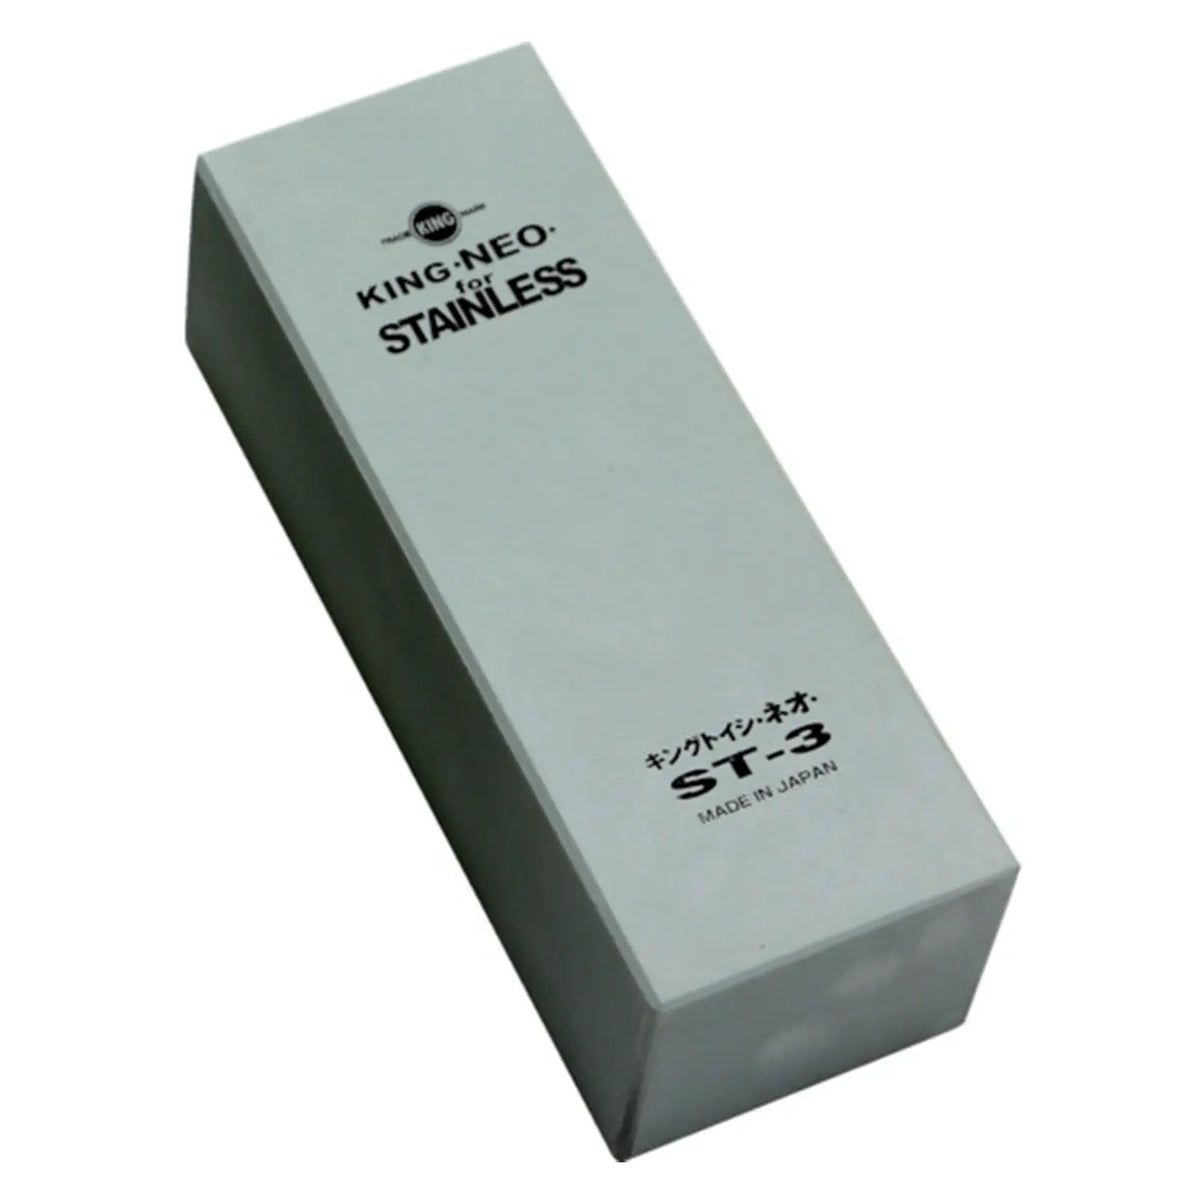 KING NEO Sharpening Stone 800 Grit for Stainless Steel Knives